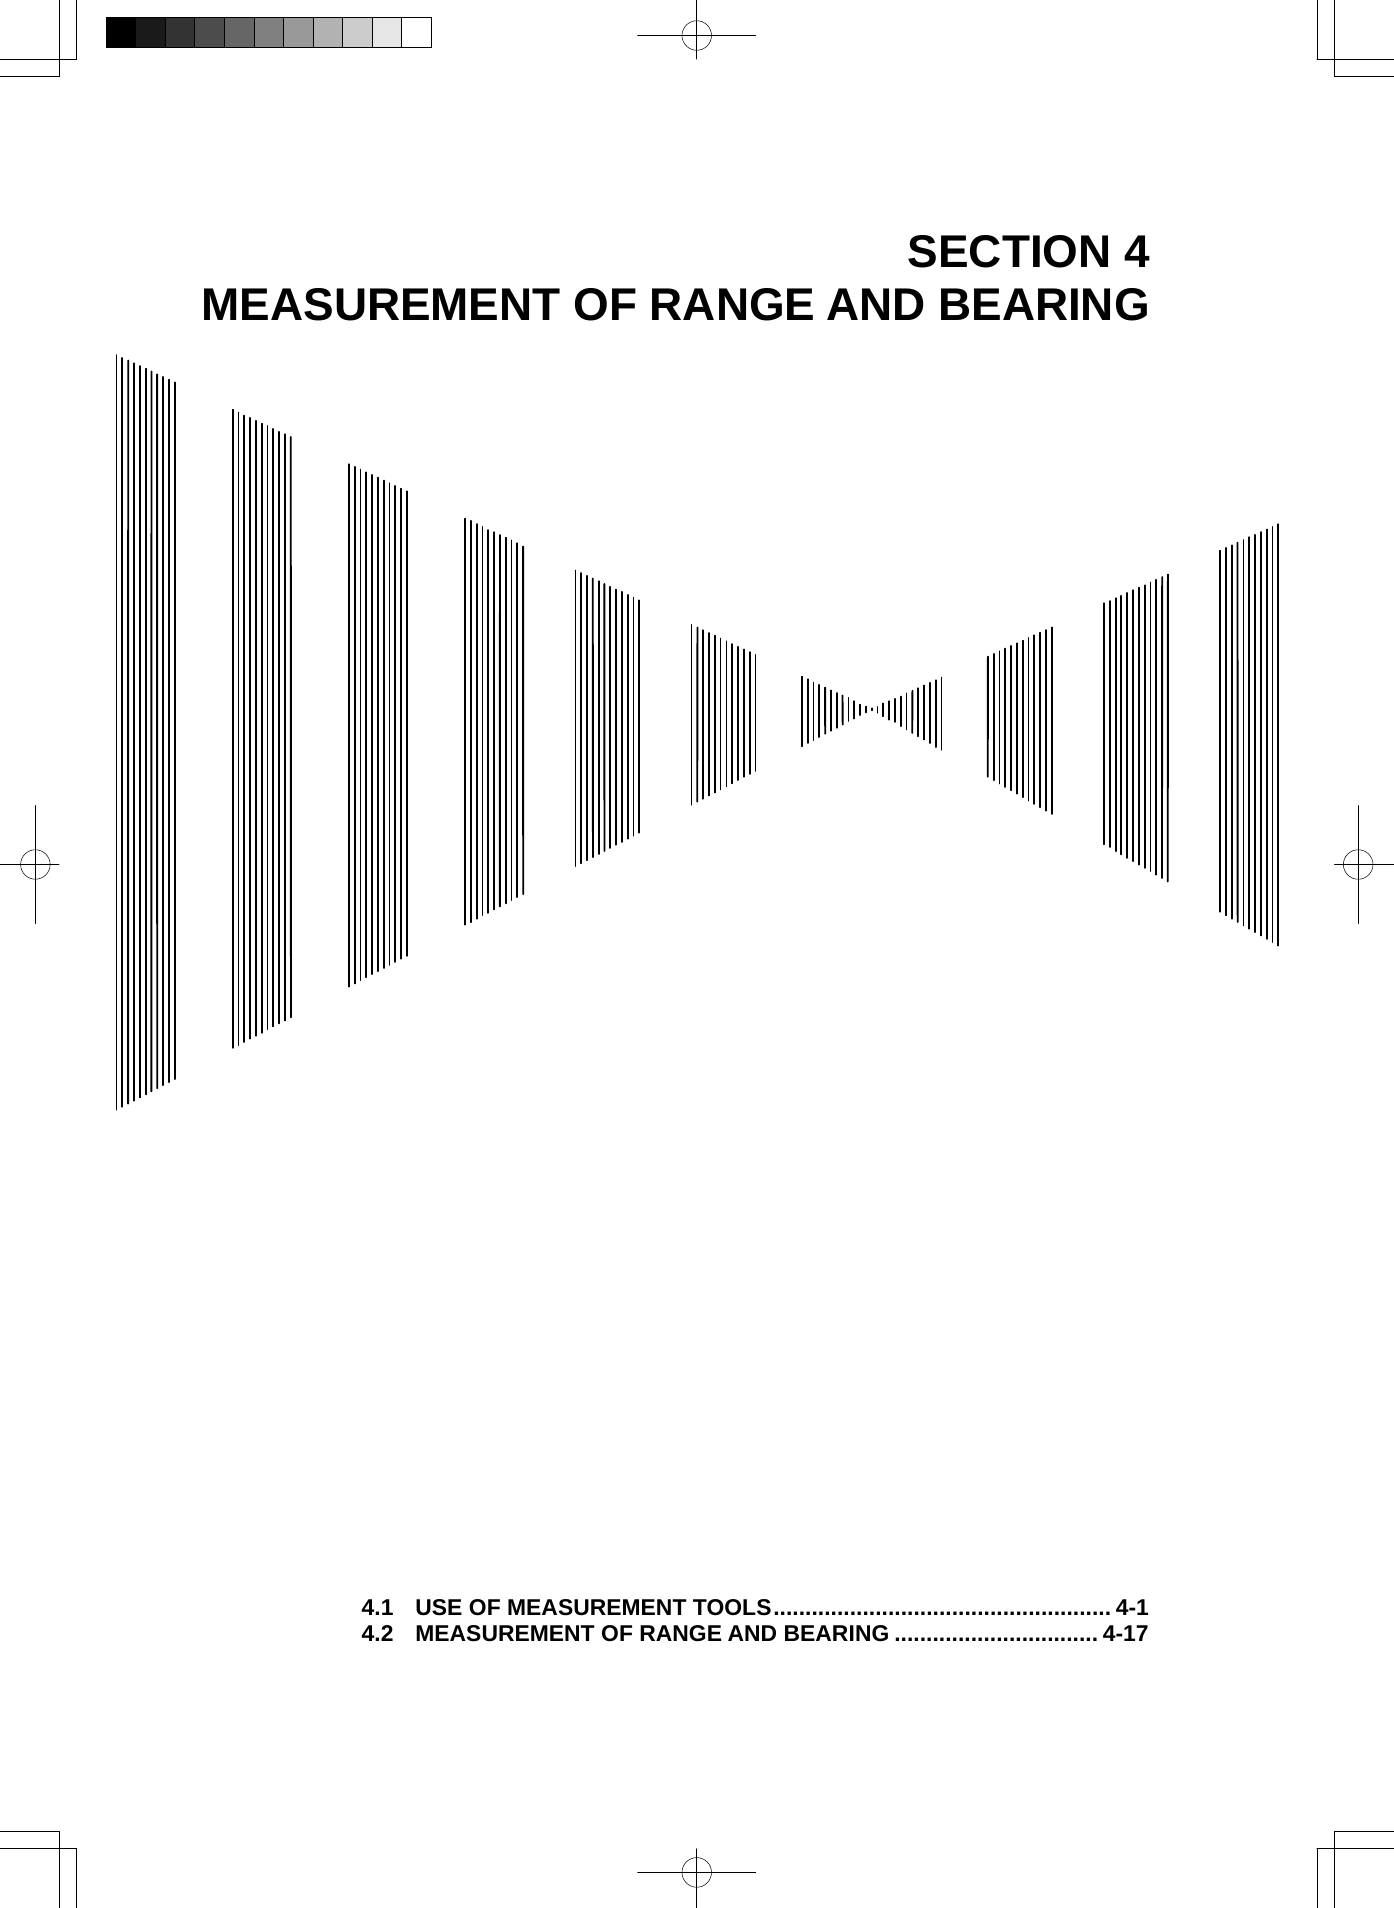   SECTION 4 MEASUREMENT OF RANGE AND BEARING                                               4.1 USE OF MEASUREMENT TOOLS..................................................... 4-1 4.2 MEASUREMENT OF RANGE AND BEARING ................................ 4-17 